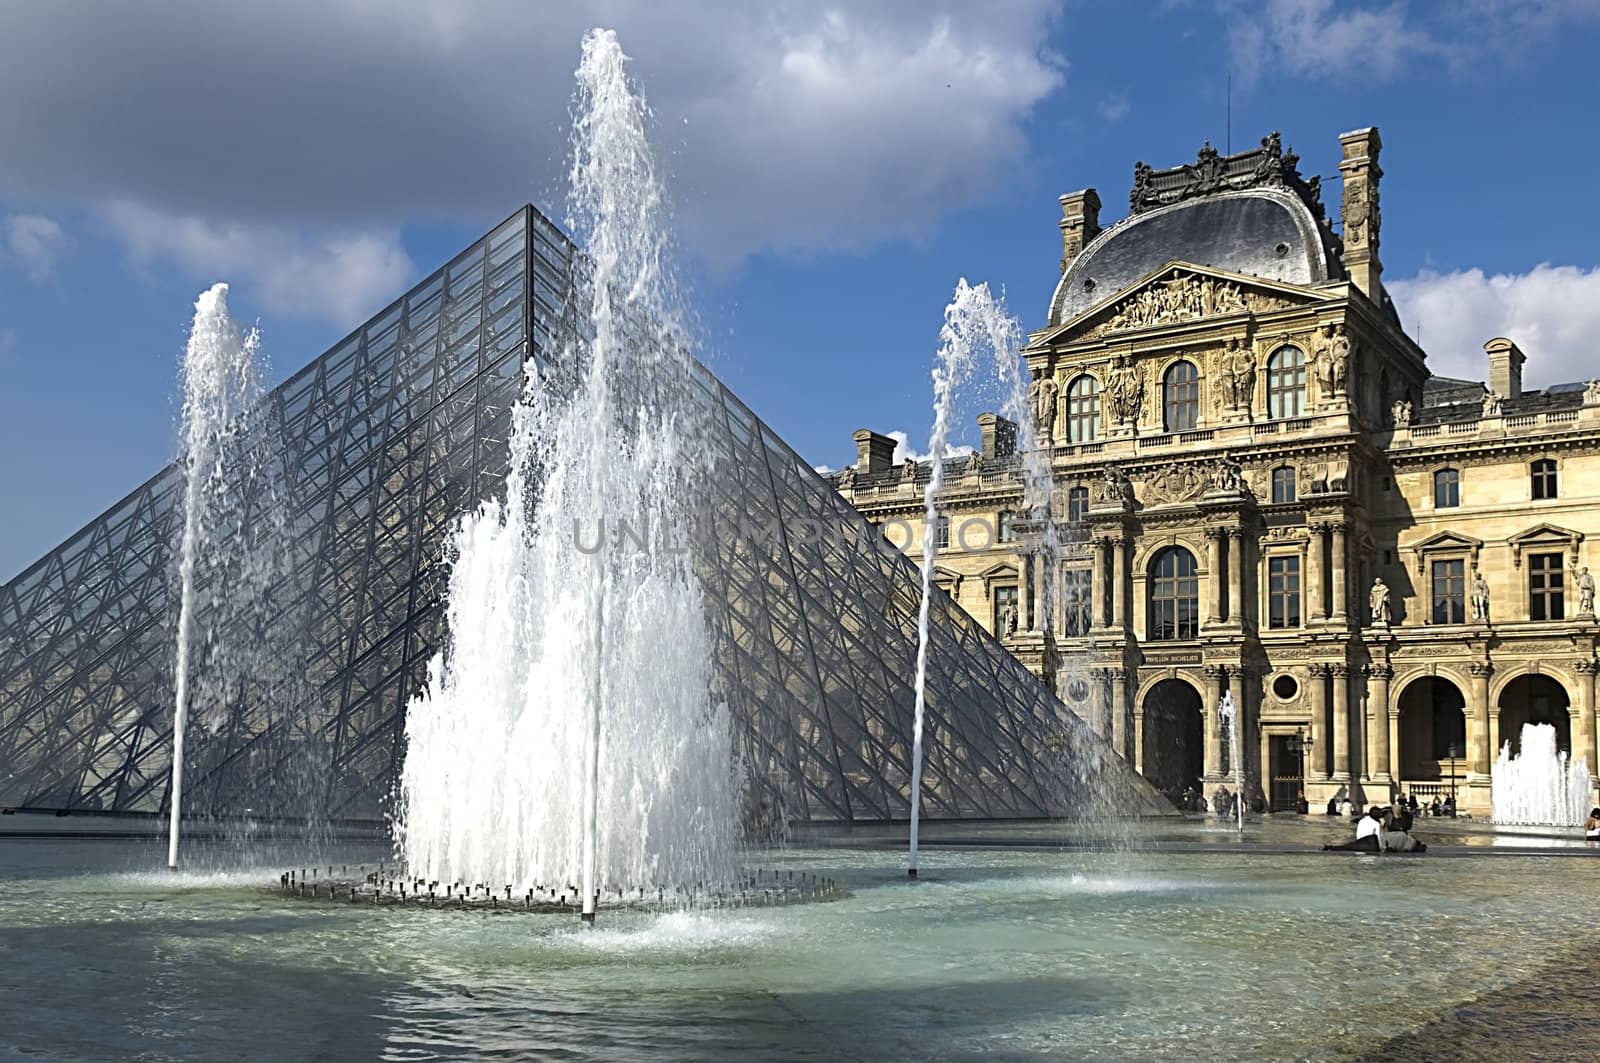 Glass Pyramid and the fountain at the Louvre Museum by irisphoto4